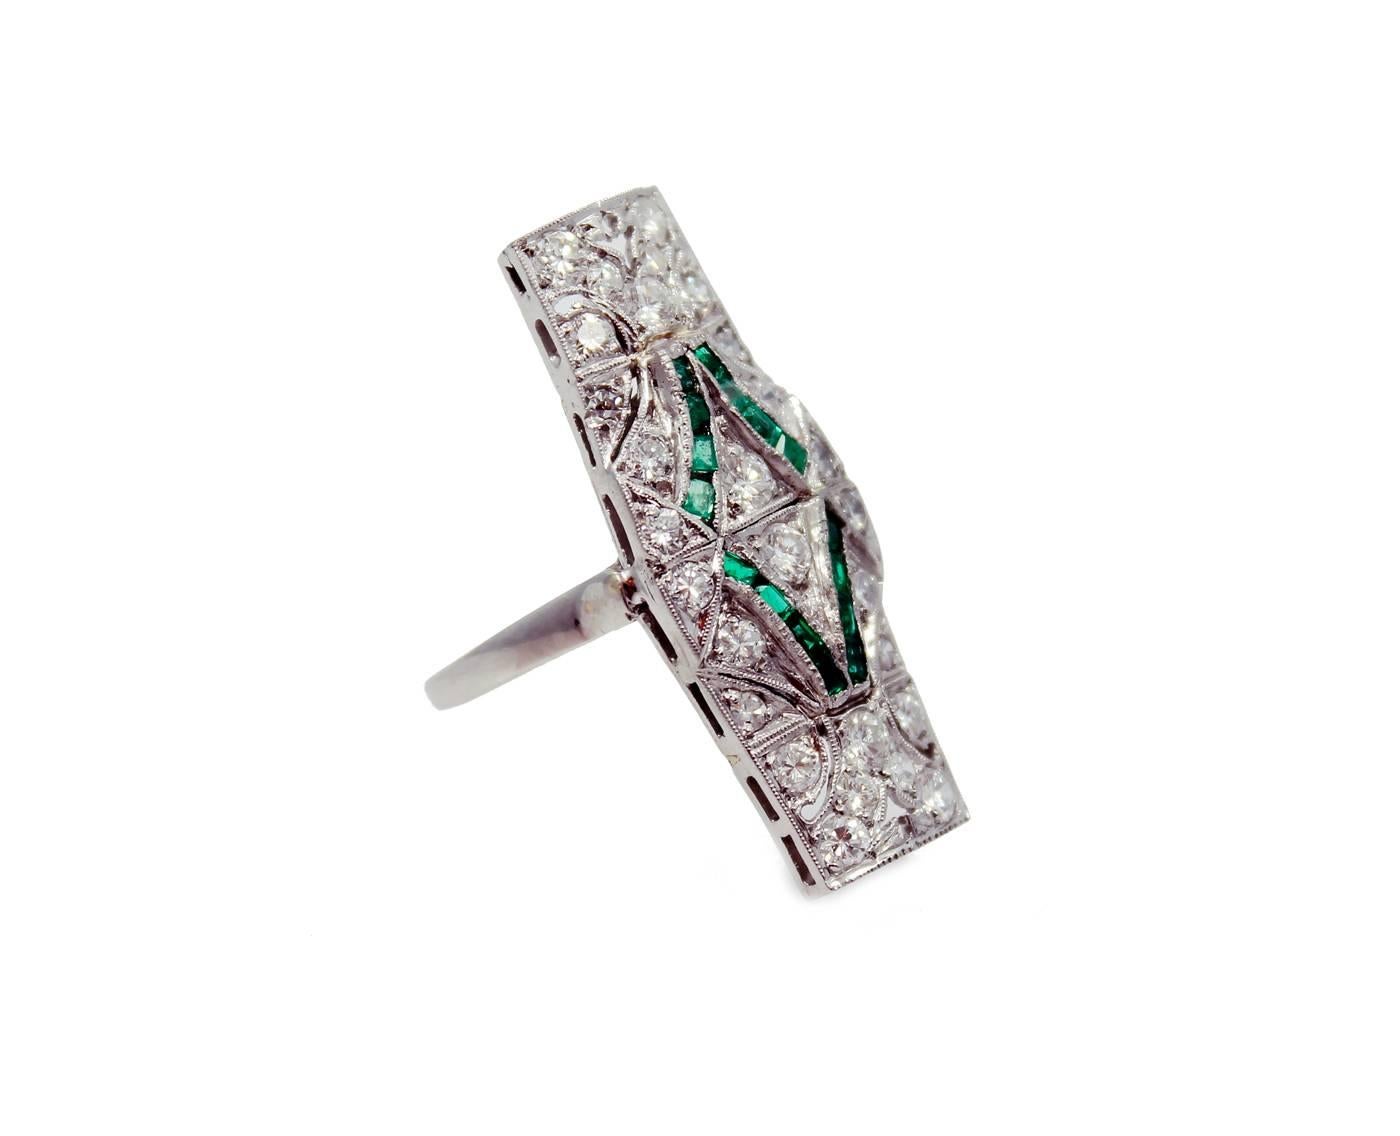 Very Special Art Deco Ring in Platinum with 28 Diamond with a total of 1.00 carats and 16 Emeralds. This ring is a size 6 3/4, but can be sized if needed. Very classic piece. 